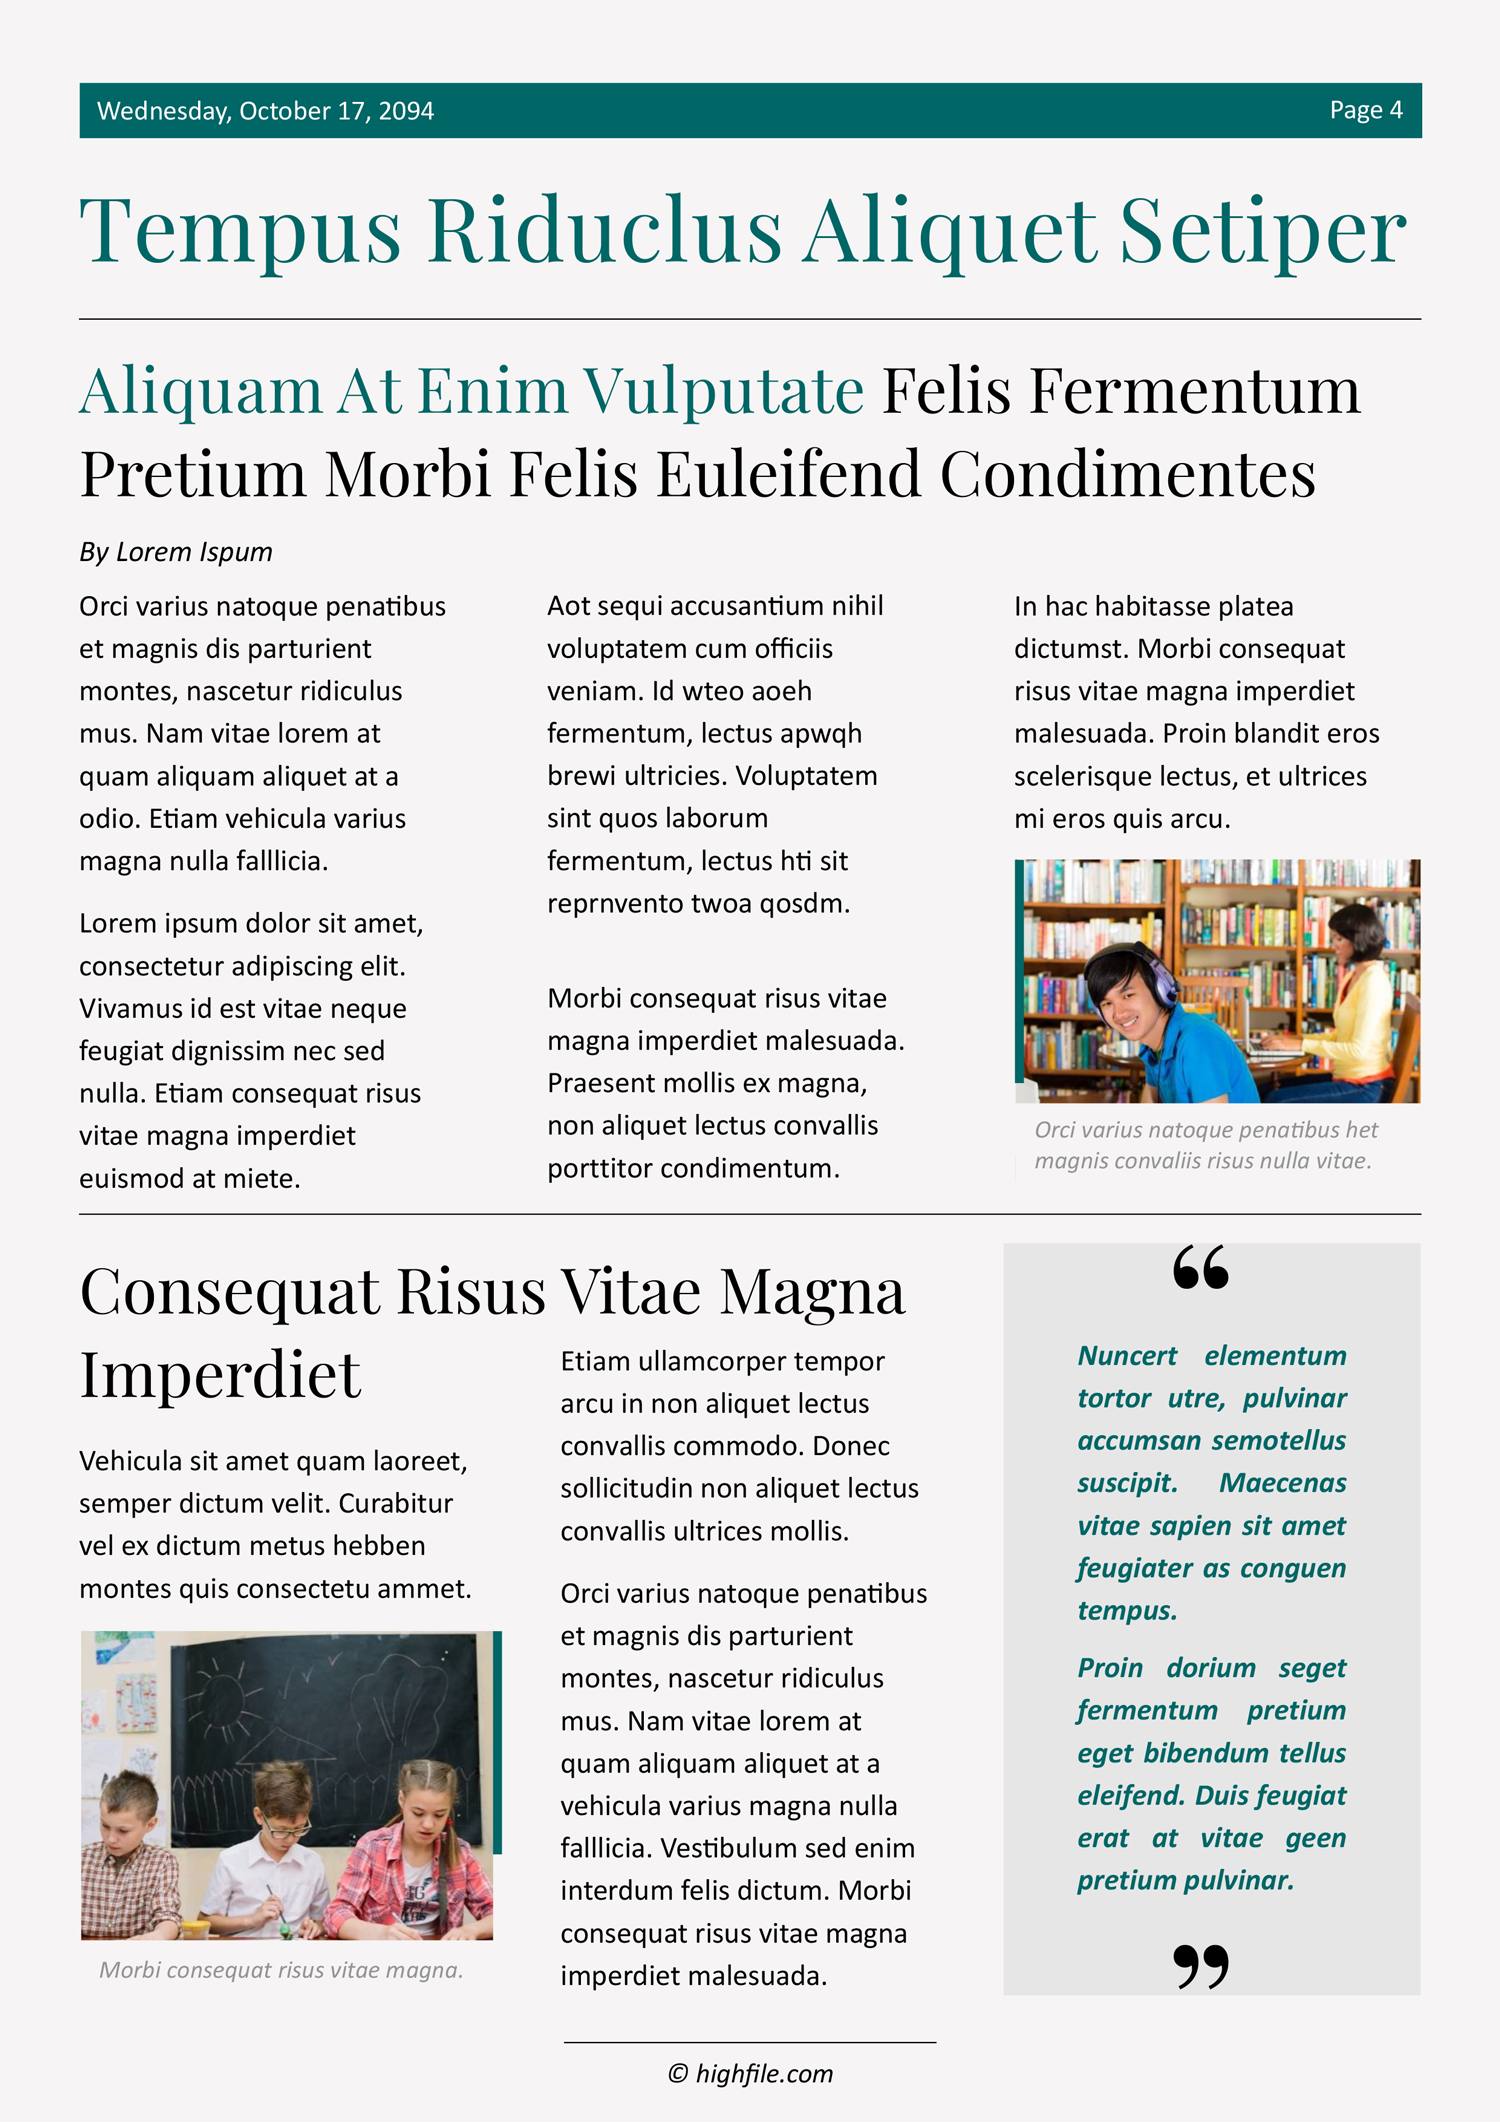 Minimal Newspaper Article Template for Students - Page 04